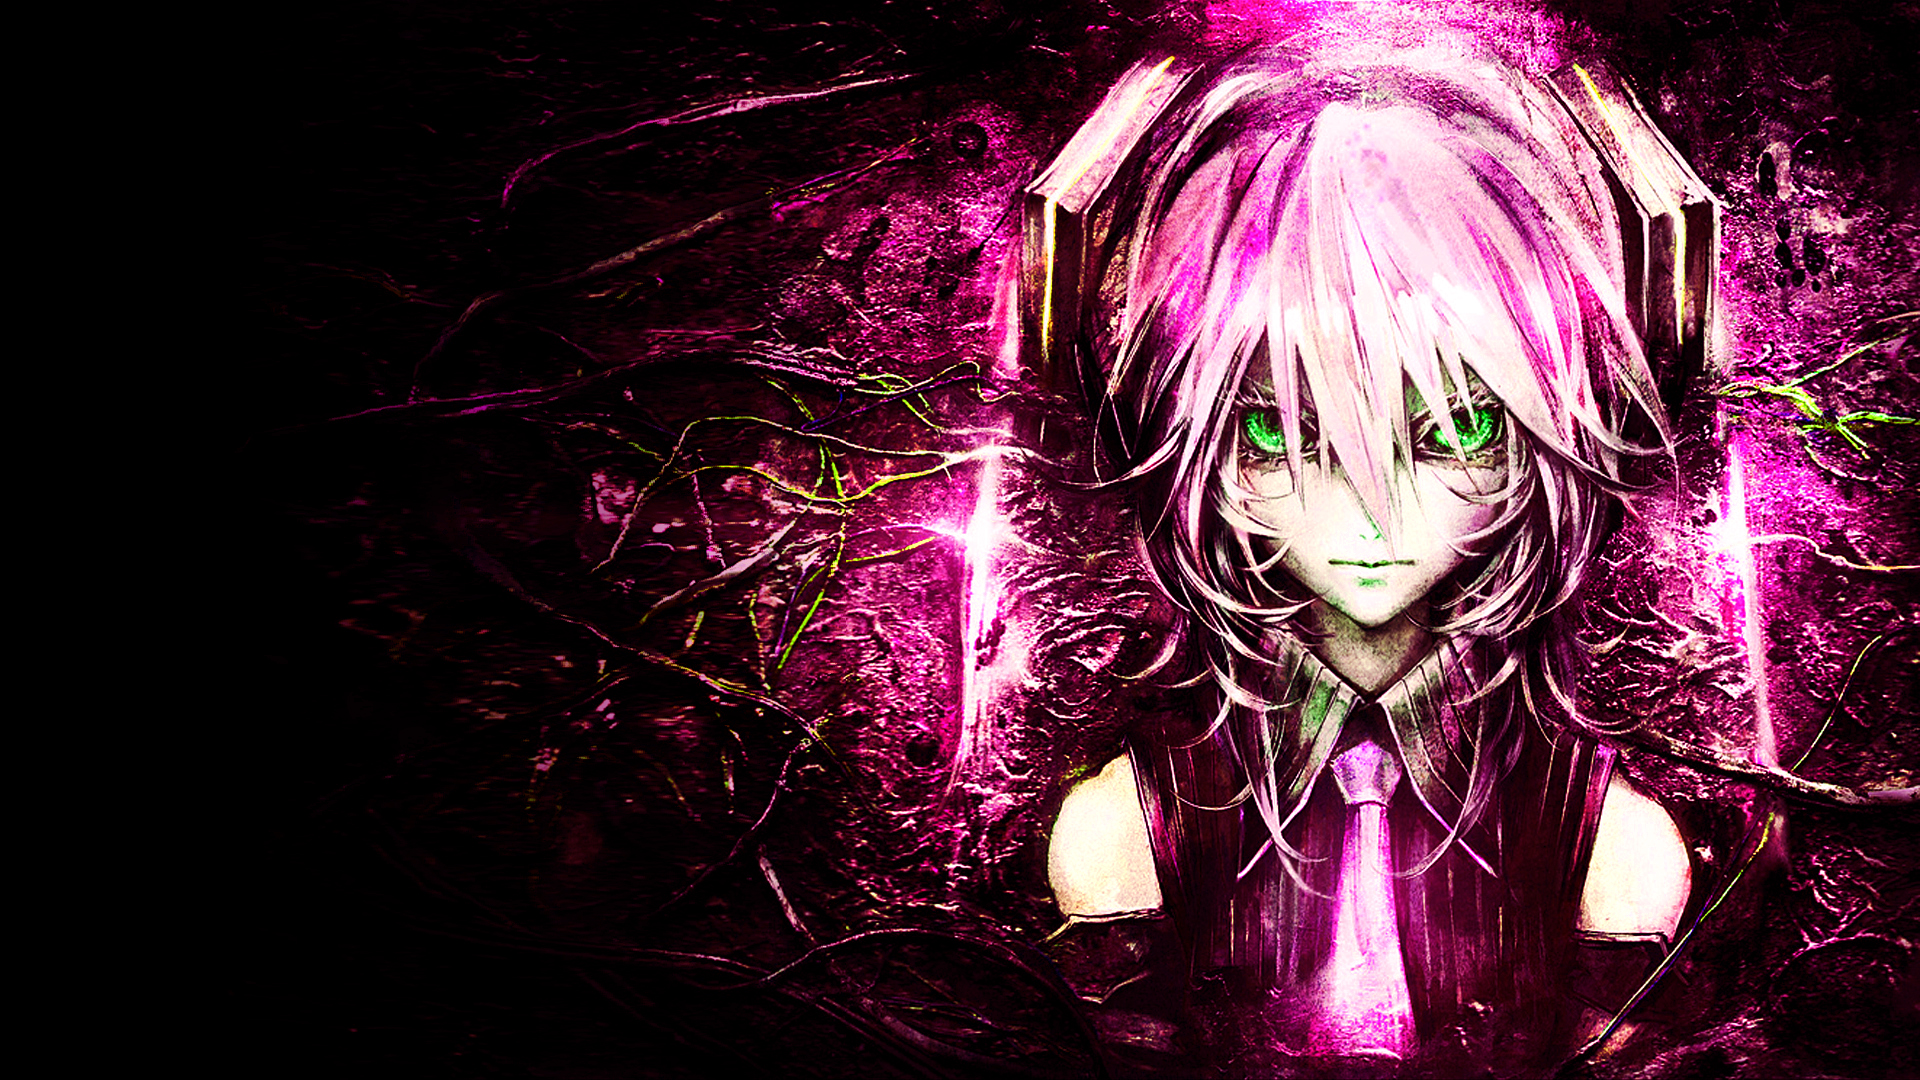 Pink Aesthetic PC Anime Wallpapers - Wallpaper Cave